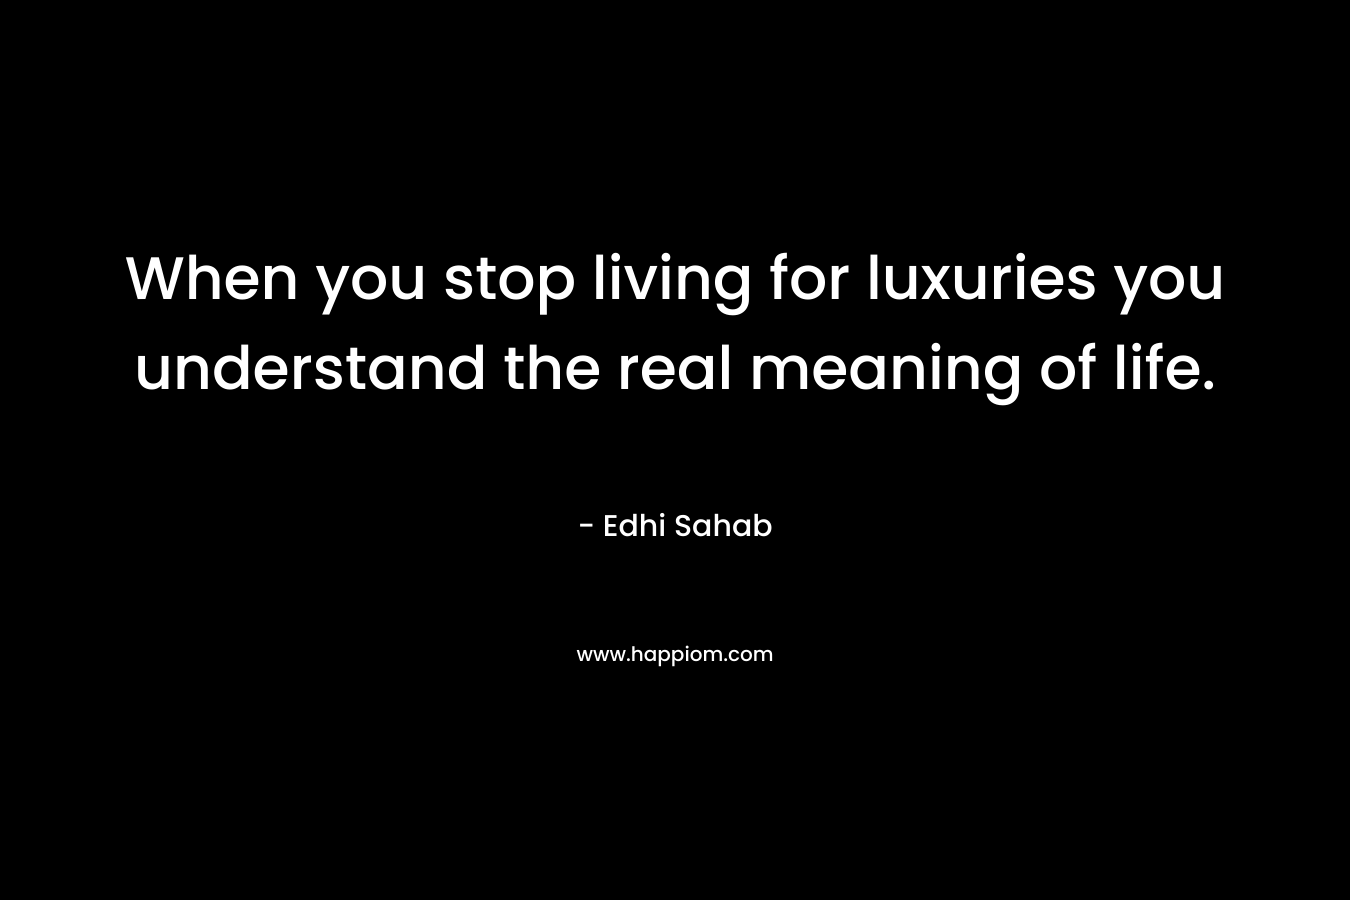 When you stop living for luxuries you understand the real meaning of life.